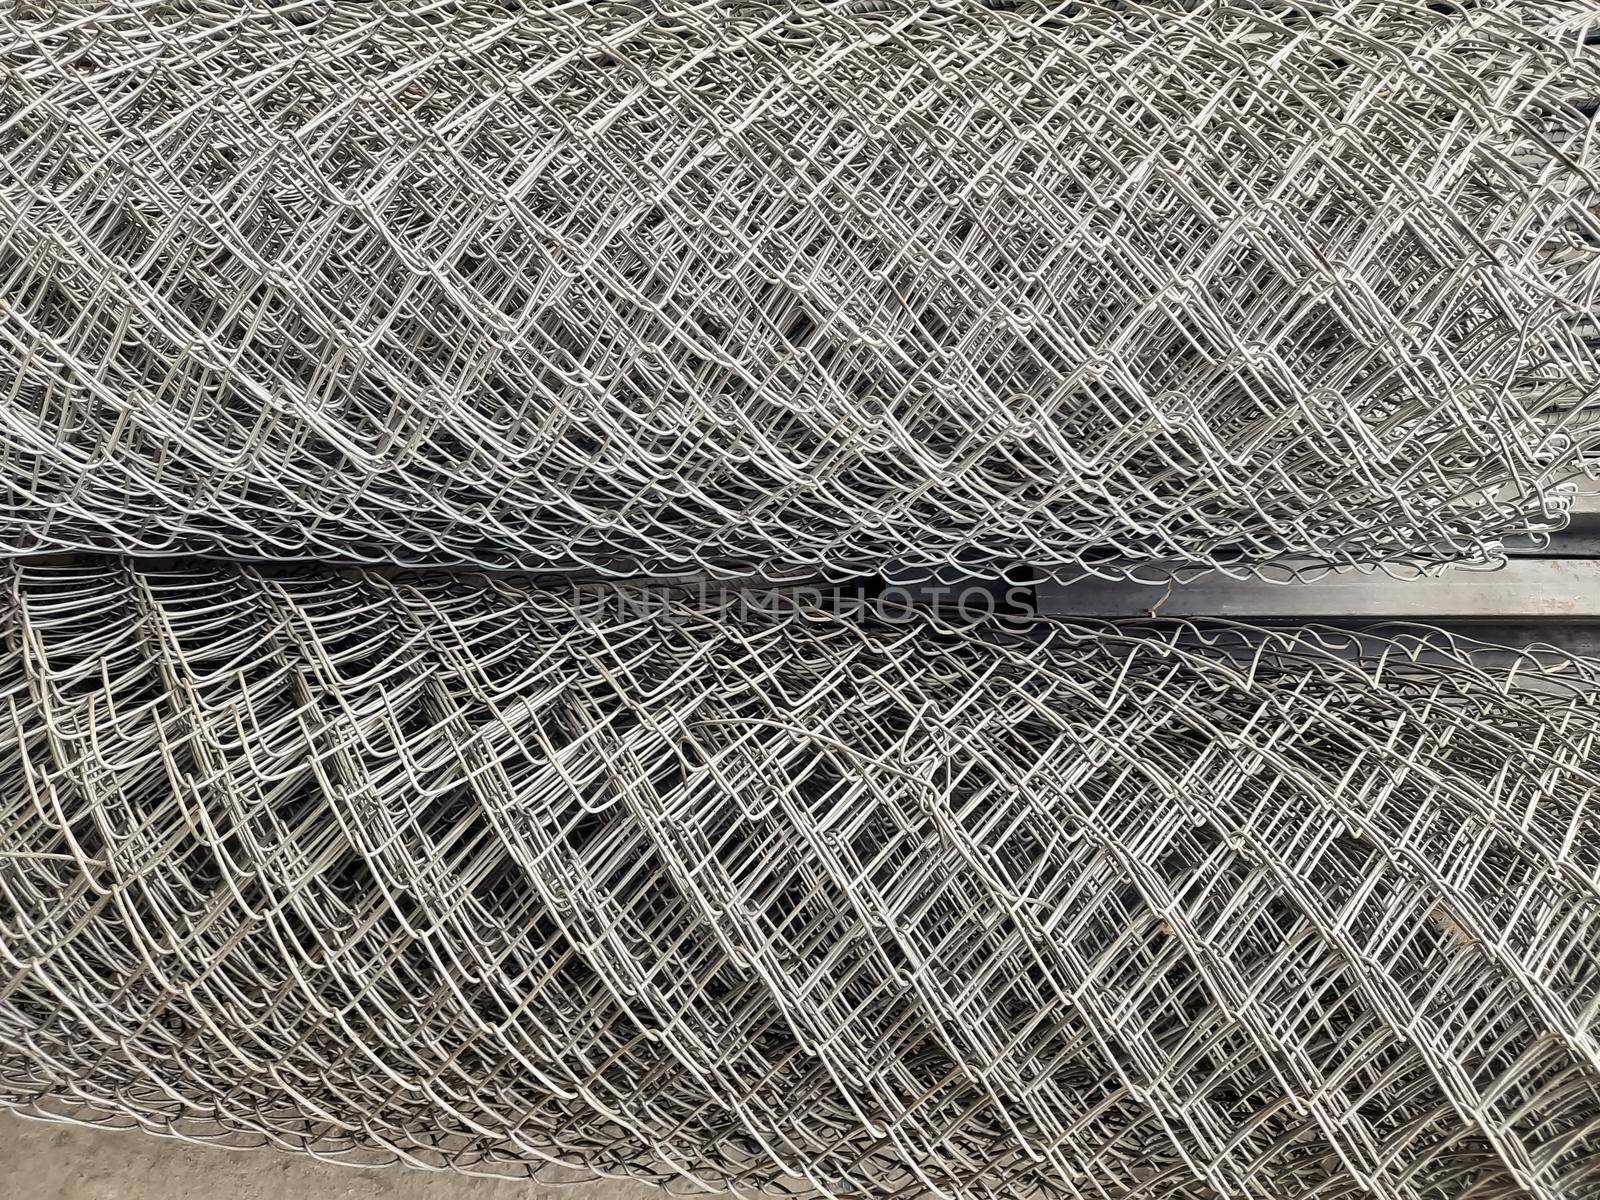 Metal bars background in diagonal lines close-up, industrial mesh of steel wire texture, building material